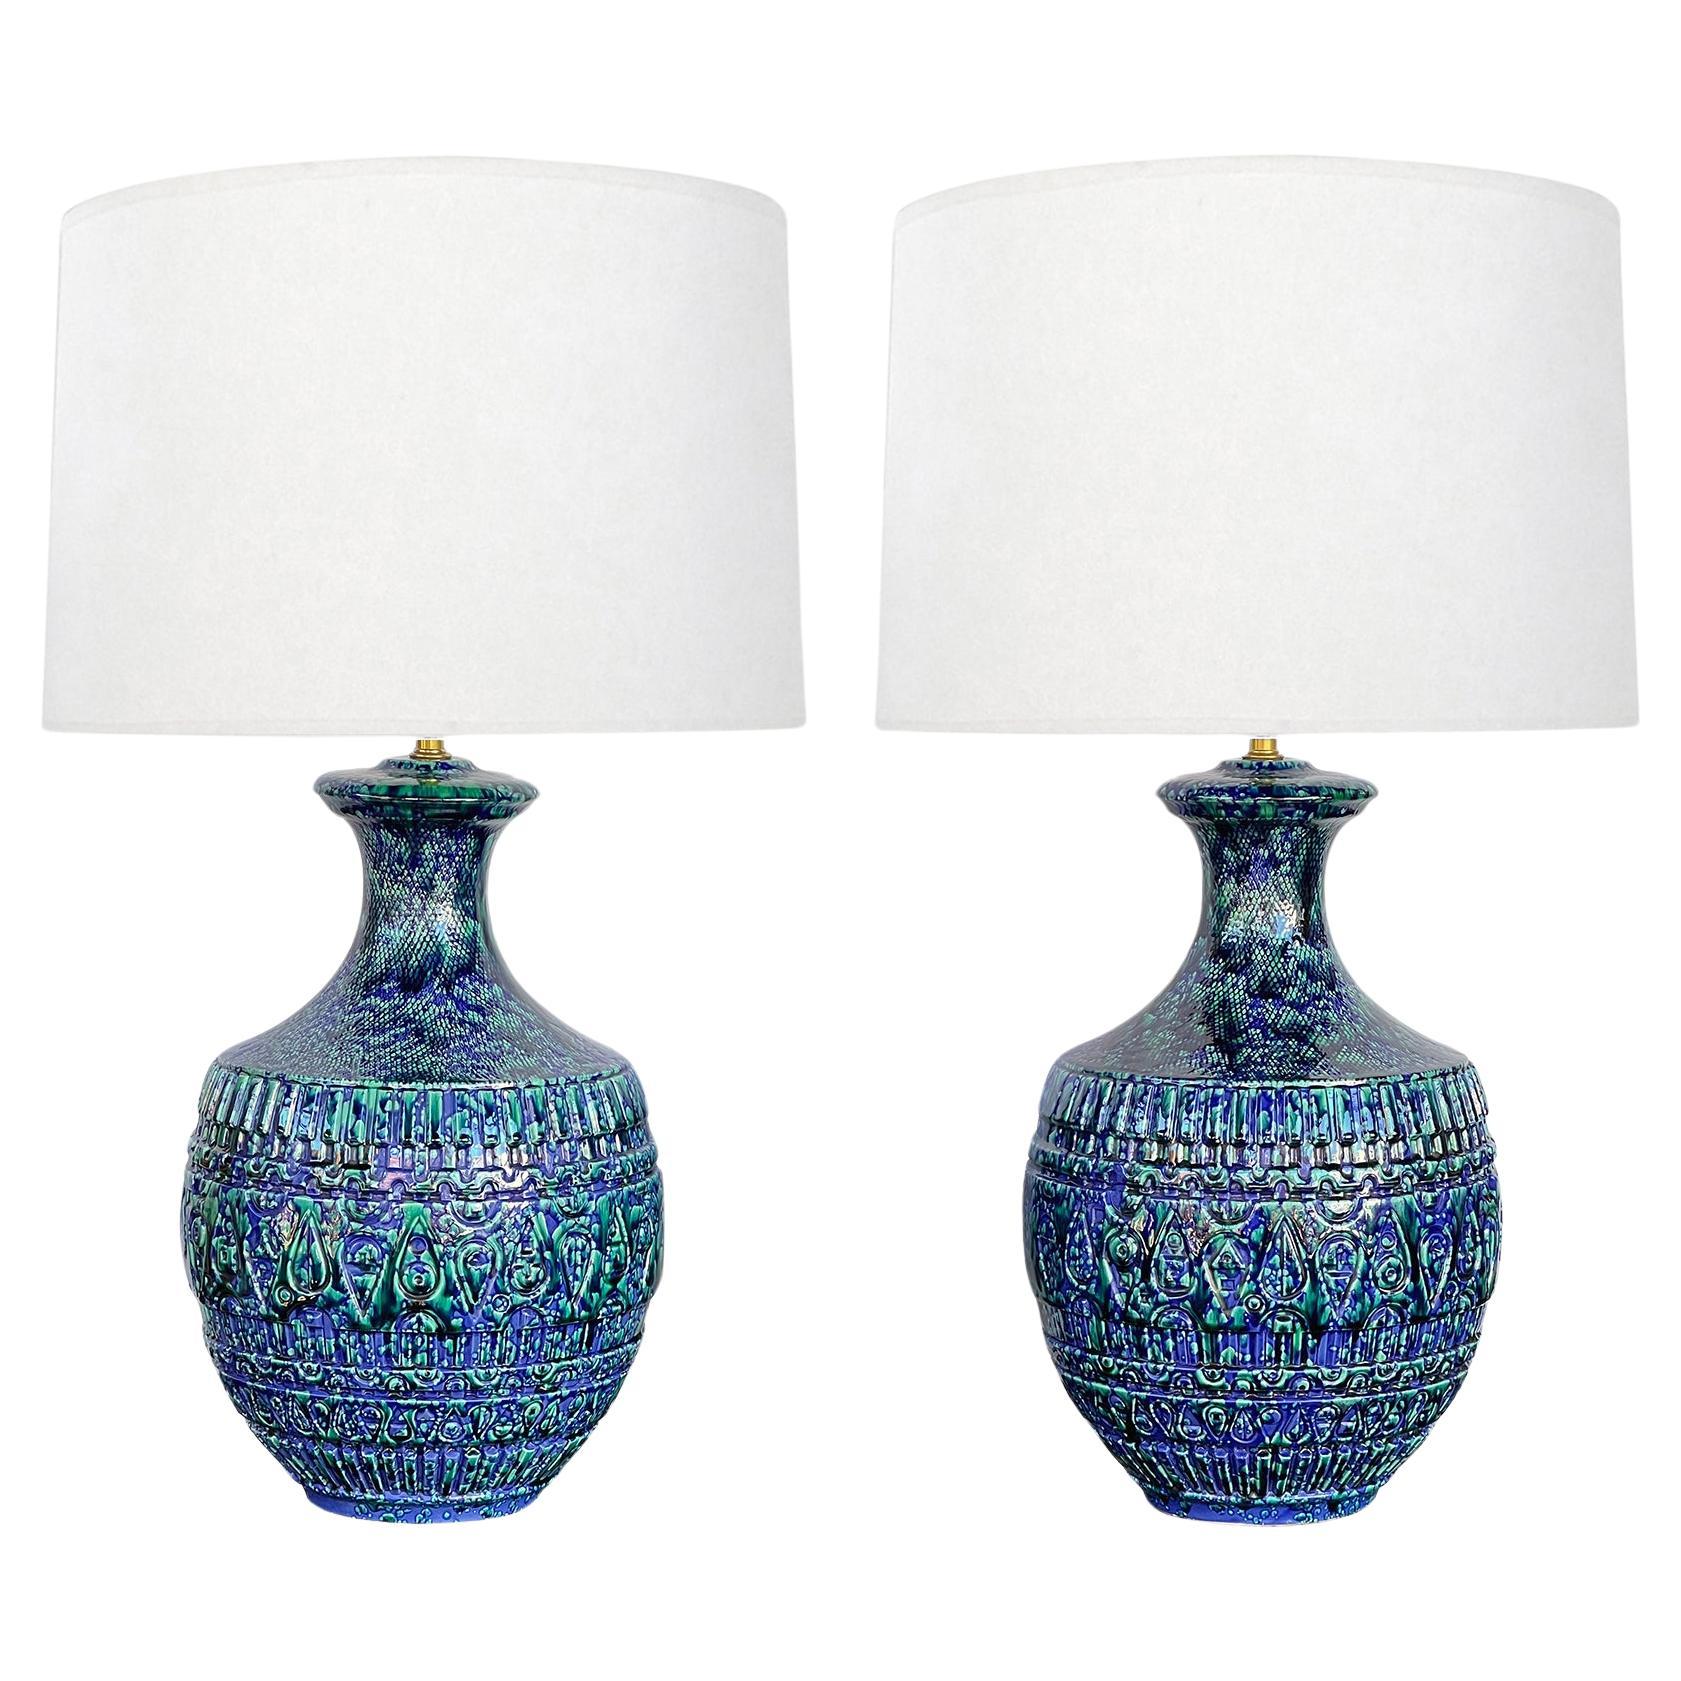 Large Pair 1960s Blue & Teal Drip Glaze Bulbous-form Lamps with Textured Surface